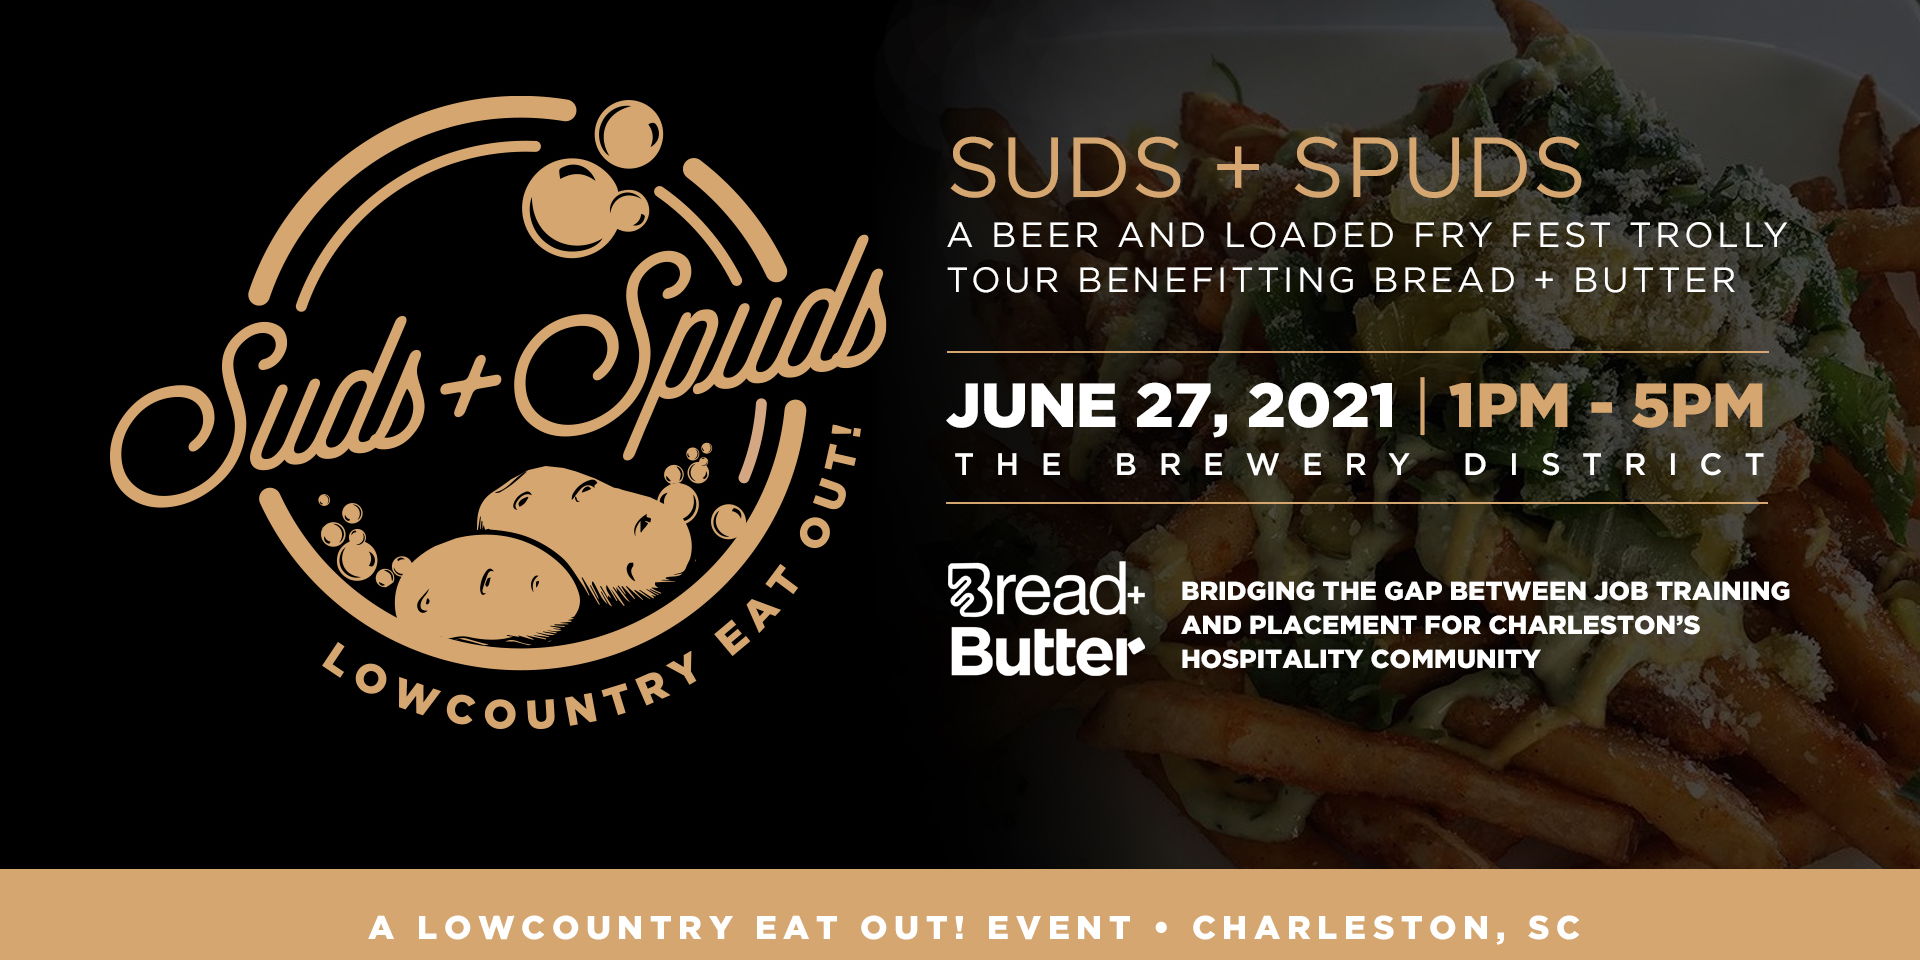 Spuds & Suds promotional image